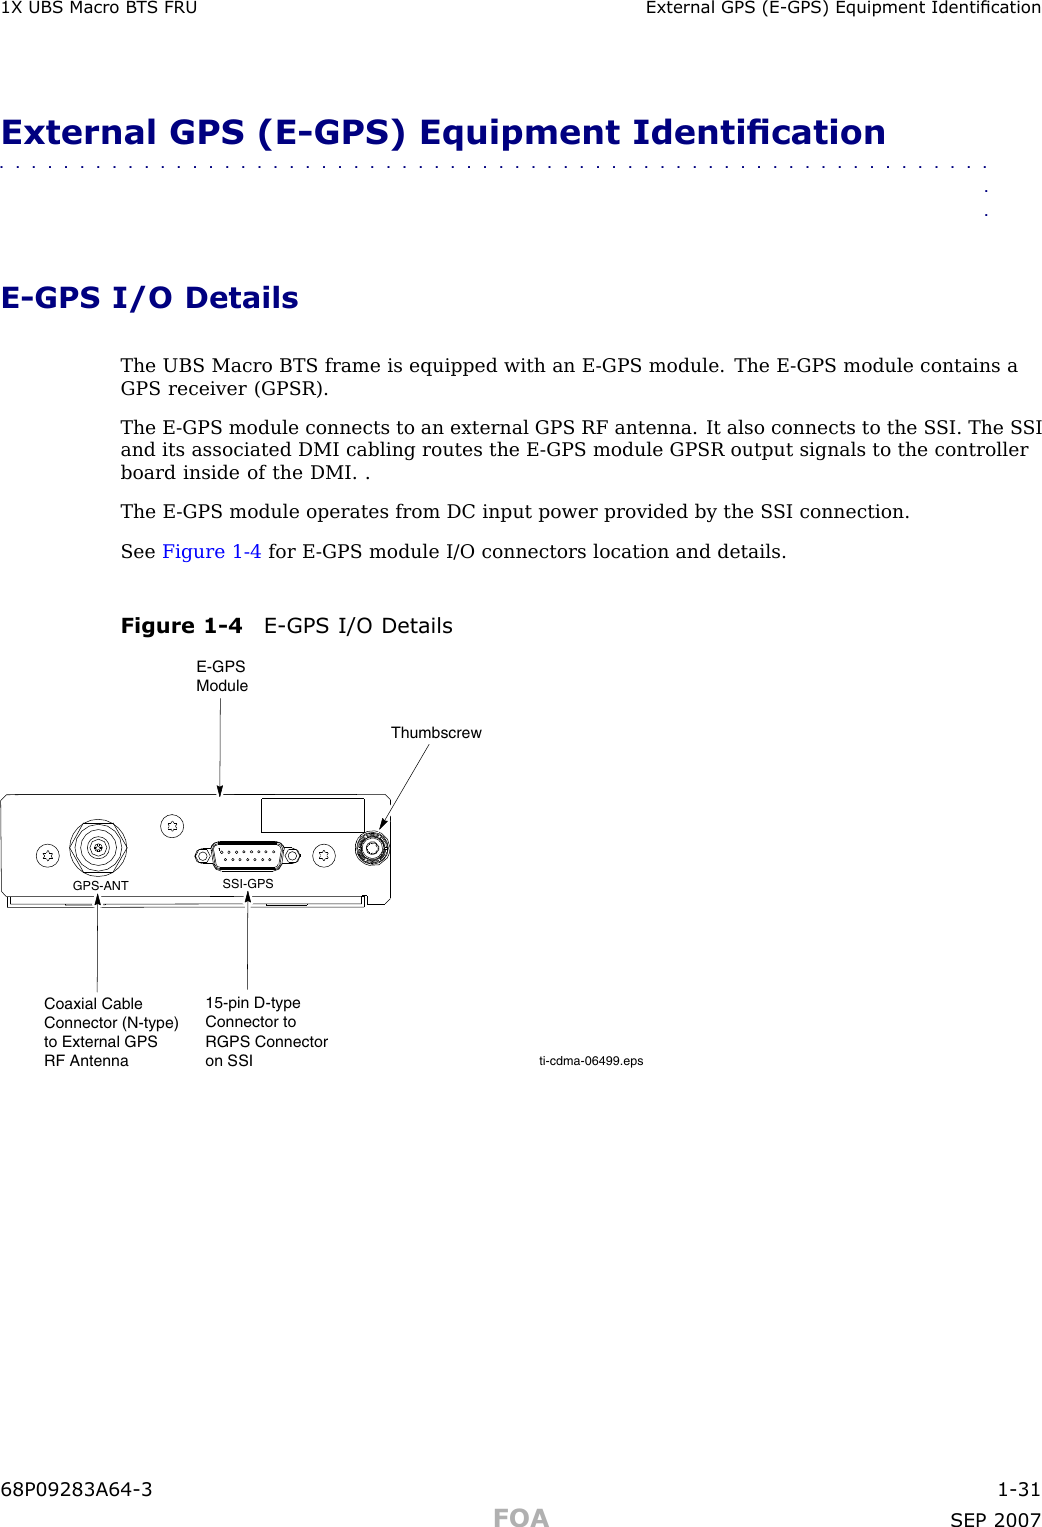 1X UBS Macro B T S FRU External GPS (E -GPS) Equipment IdenticationExternal GPS (E -GPS) Equipment Identication■■■■■■■■■■■■■■■■■■■■■■■■■■■■■■■■■■■■■■■■■■■■■■■■■■■■■■■■■■■■■■■■E -GPS I/O DetailsThe UBS Macro BTS frame is equipped with an E -GPS module. The E -GPS module contains aGPS receiver (GPSR).The E -GPS module connects to an external GPS RF antenna. It also connects to the S SI. The S SIand its associated DMI cabling routes the E -GPS module GPSR output signals to the controllerboard inside of the DMI. .The E -GPS module operates from DC input power provided by the S SI connection.See Figure 1 -4 for E -GPS module I/O connectors location and details.Figure 1 -4 E -GPS I/O Detailsti-cdma-06499.epsGPS-ANT SSI-GPSThumbscrewE-GPS Module15-pin D-type Connector to RGPS Connectoron SSI Coaxial Cable Connector (N-type) to External GPS RF Antenna68P09283A64 -3 1 -31FOA SEP 2007